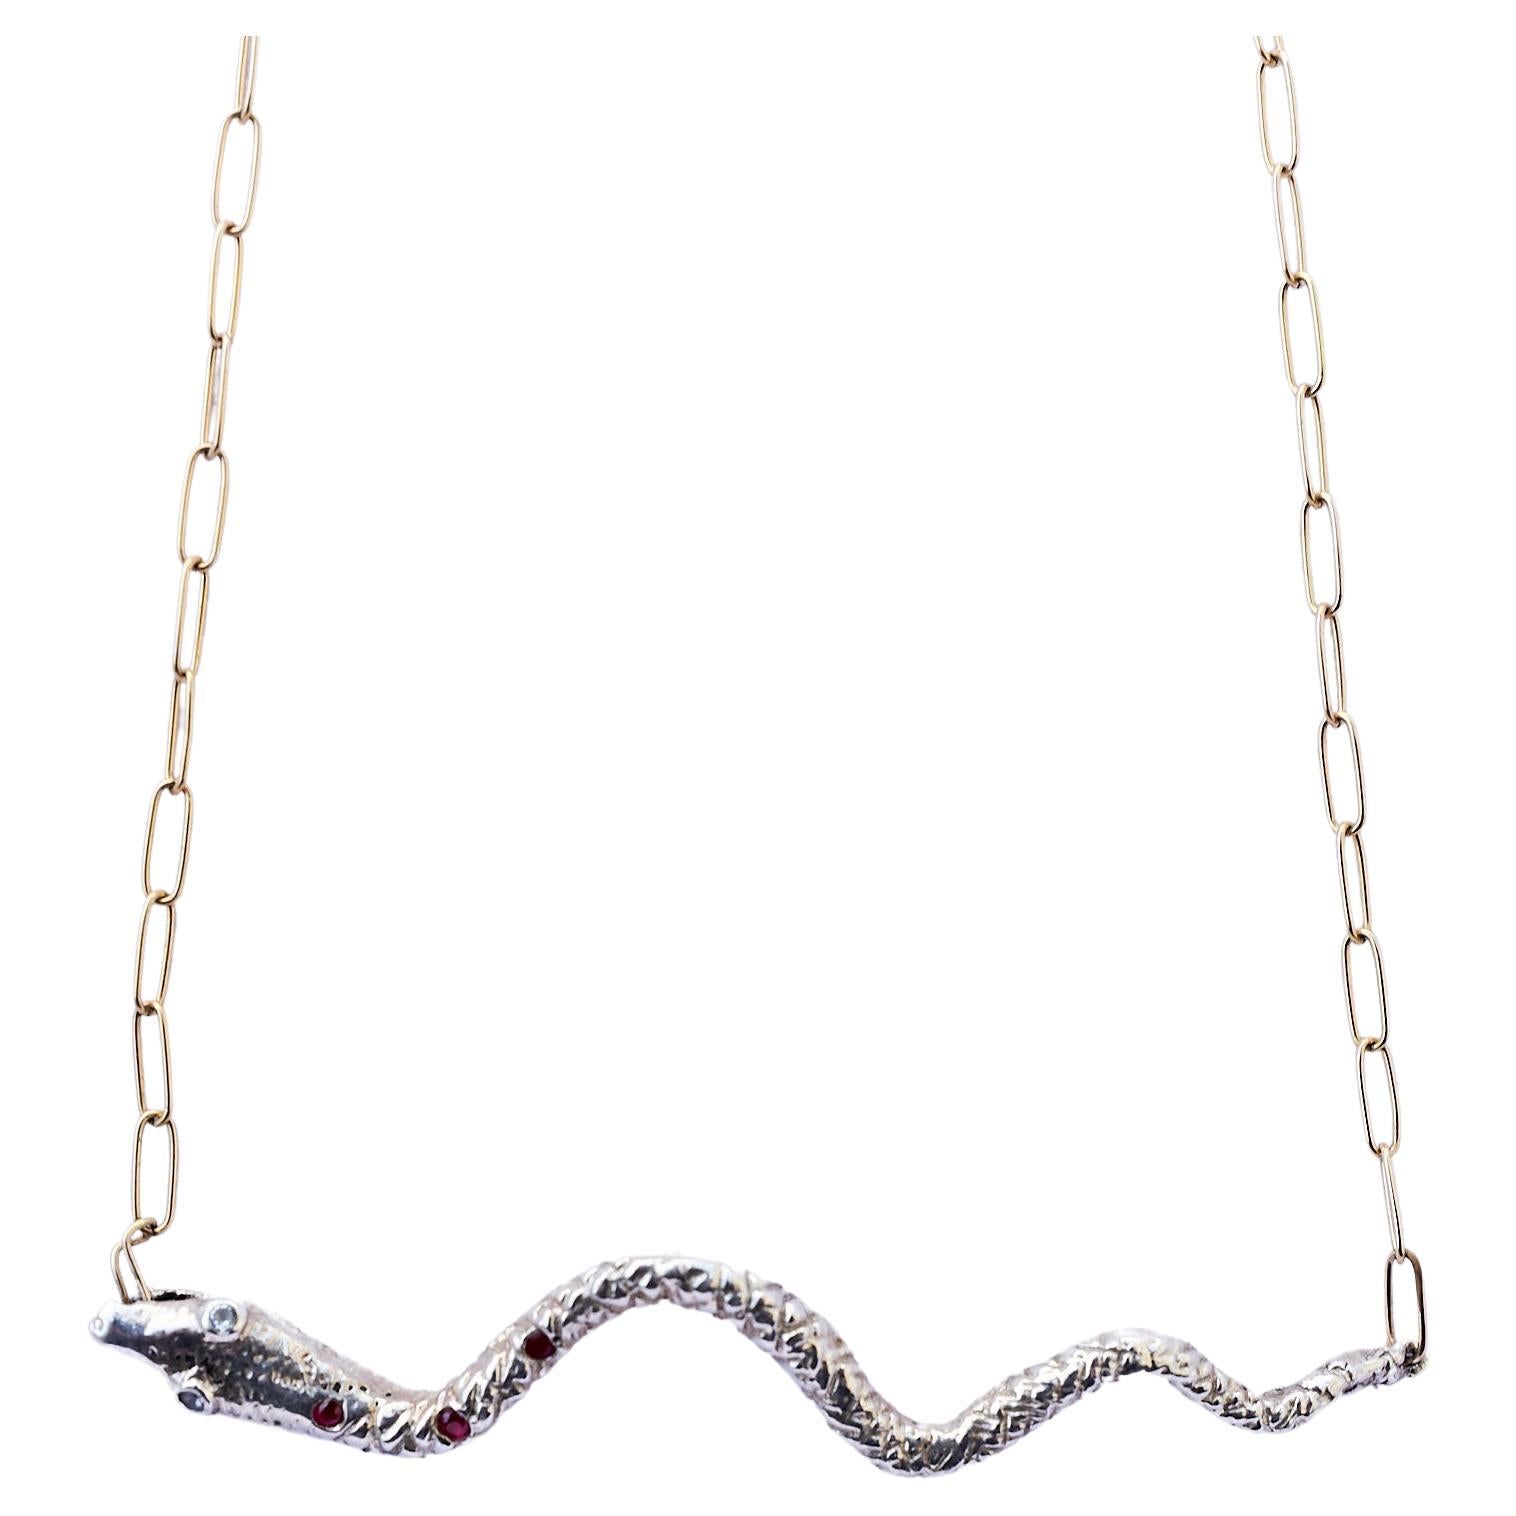 Snake Necklace Silver Ruby Iolite Gold Filled Chain J Dauphin For Sale